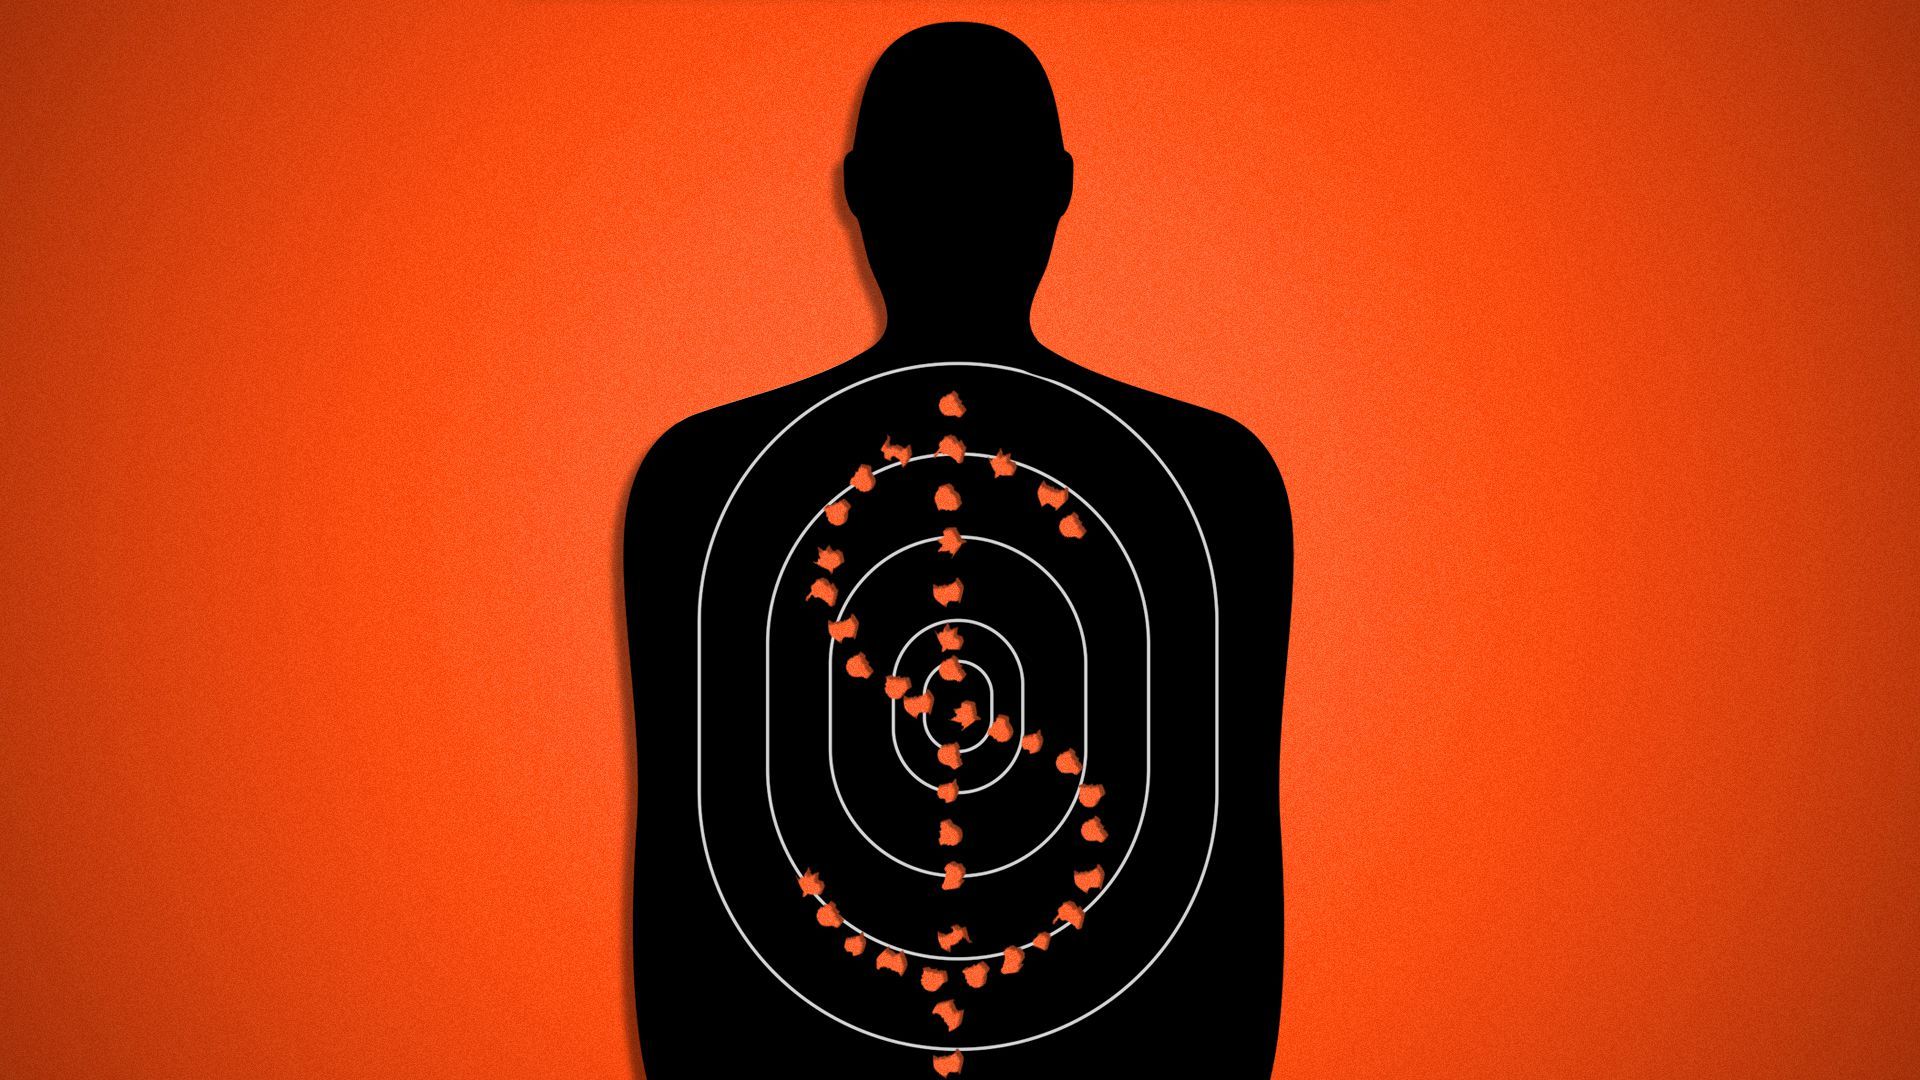  Illustration of a gun target with bullet holes forming a dollar sign.